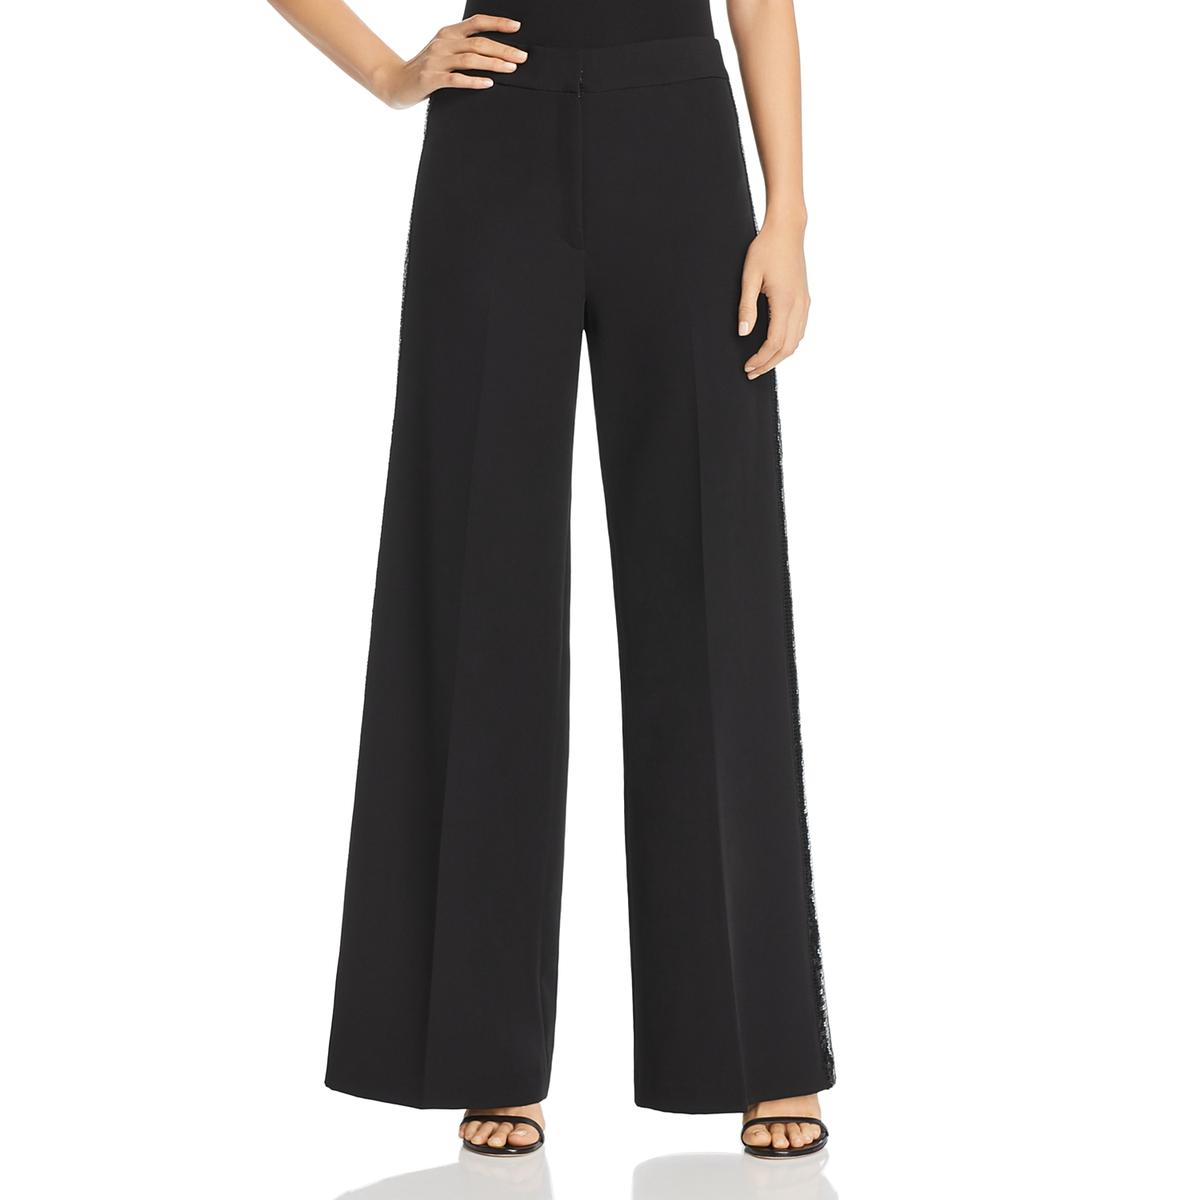 Milly Womens Black Sequined Wide Leg Dress Pants Trousers 10 BHFO 2824